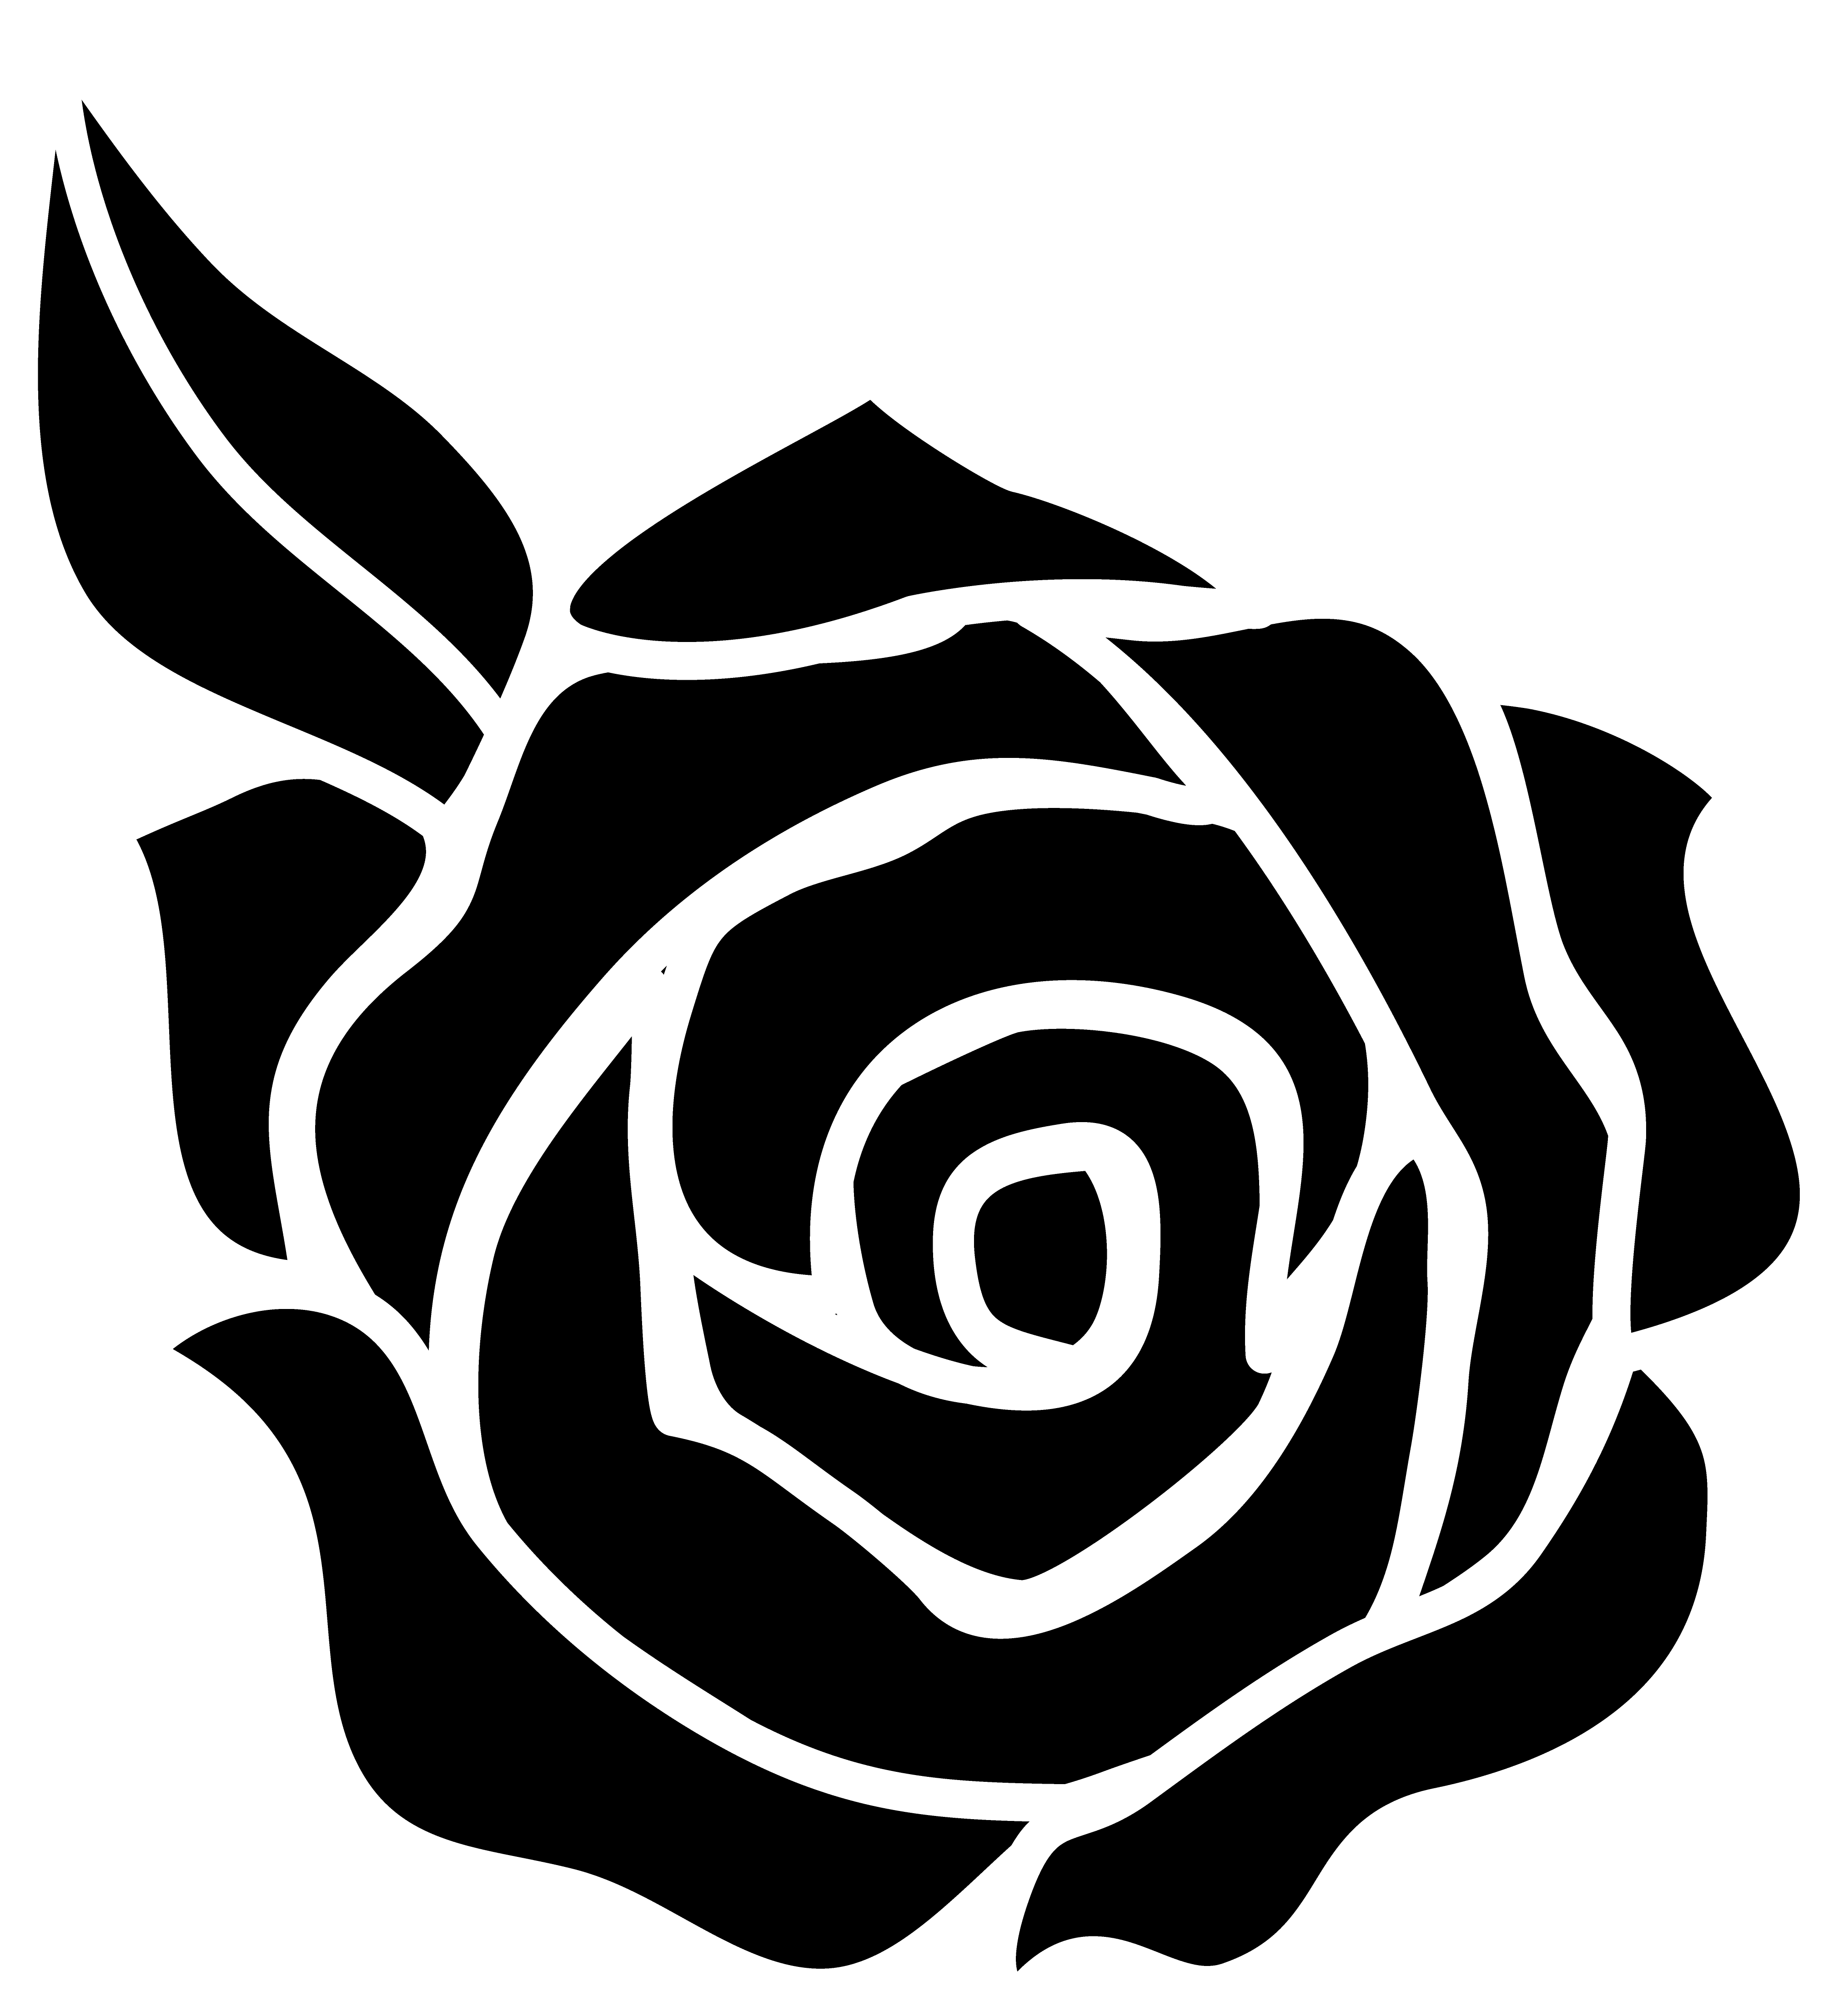 Black and White Rose Silhouette